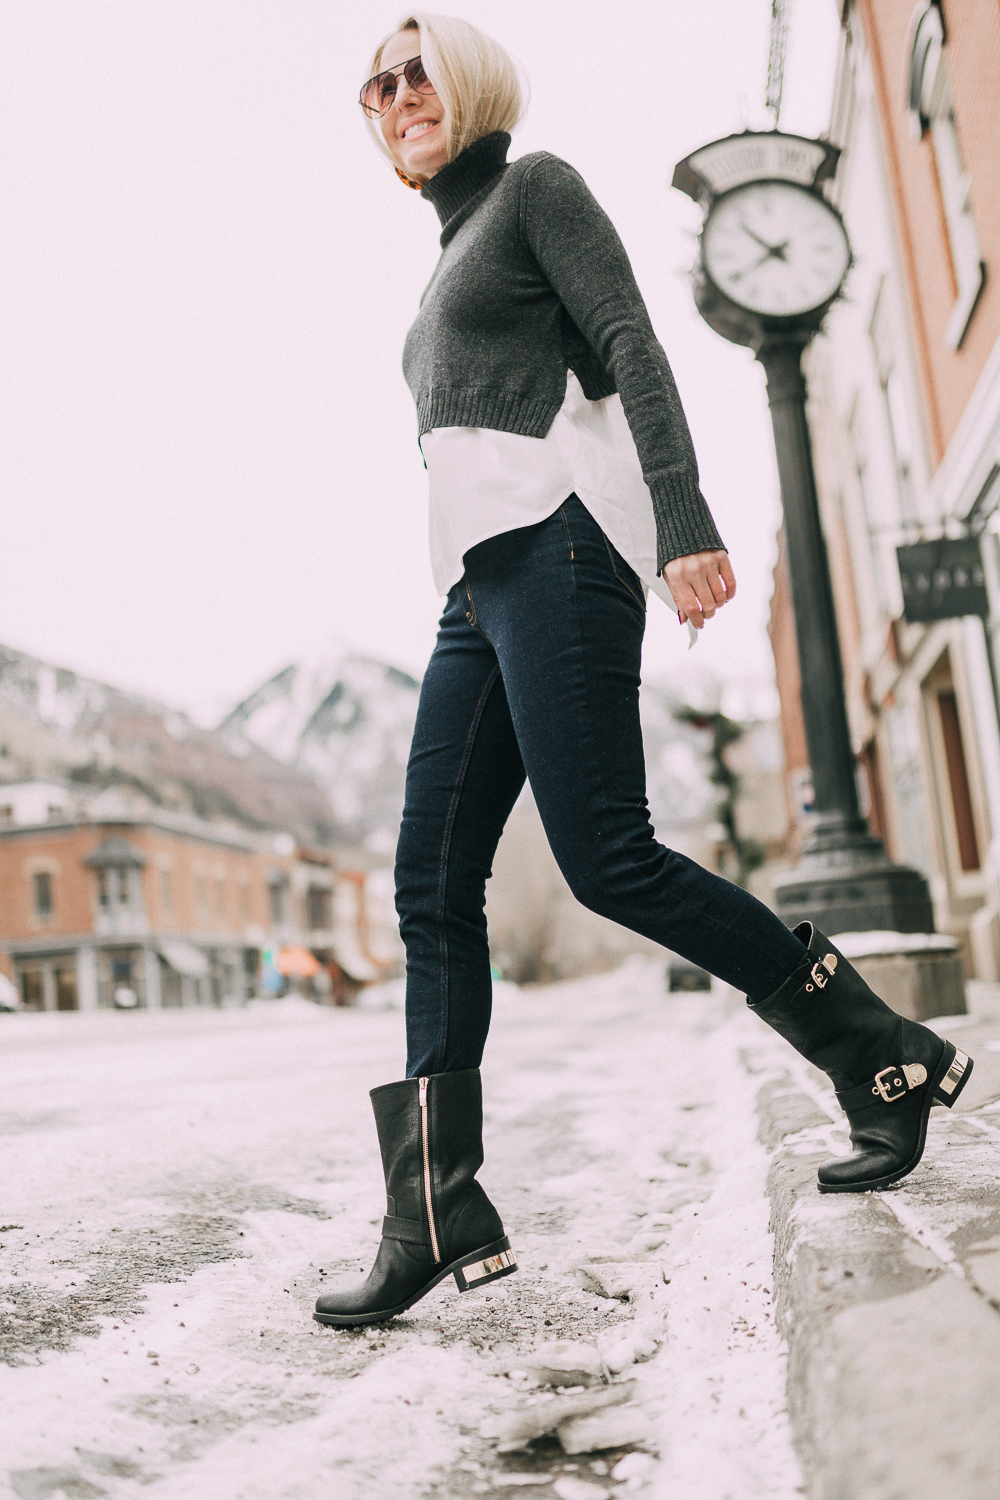 Vince Camuto Sale, Fashion blogger Erin Busbee of BusbeeStyle.com wearing the Vince Camuto Winchell moto boots with dark wash skinny jeans and a layered sweater in Telluride, CO